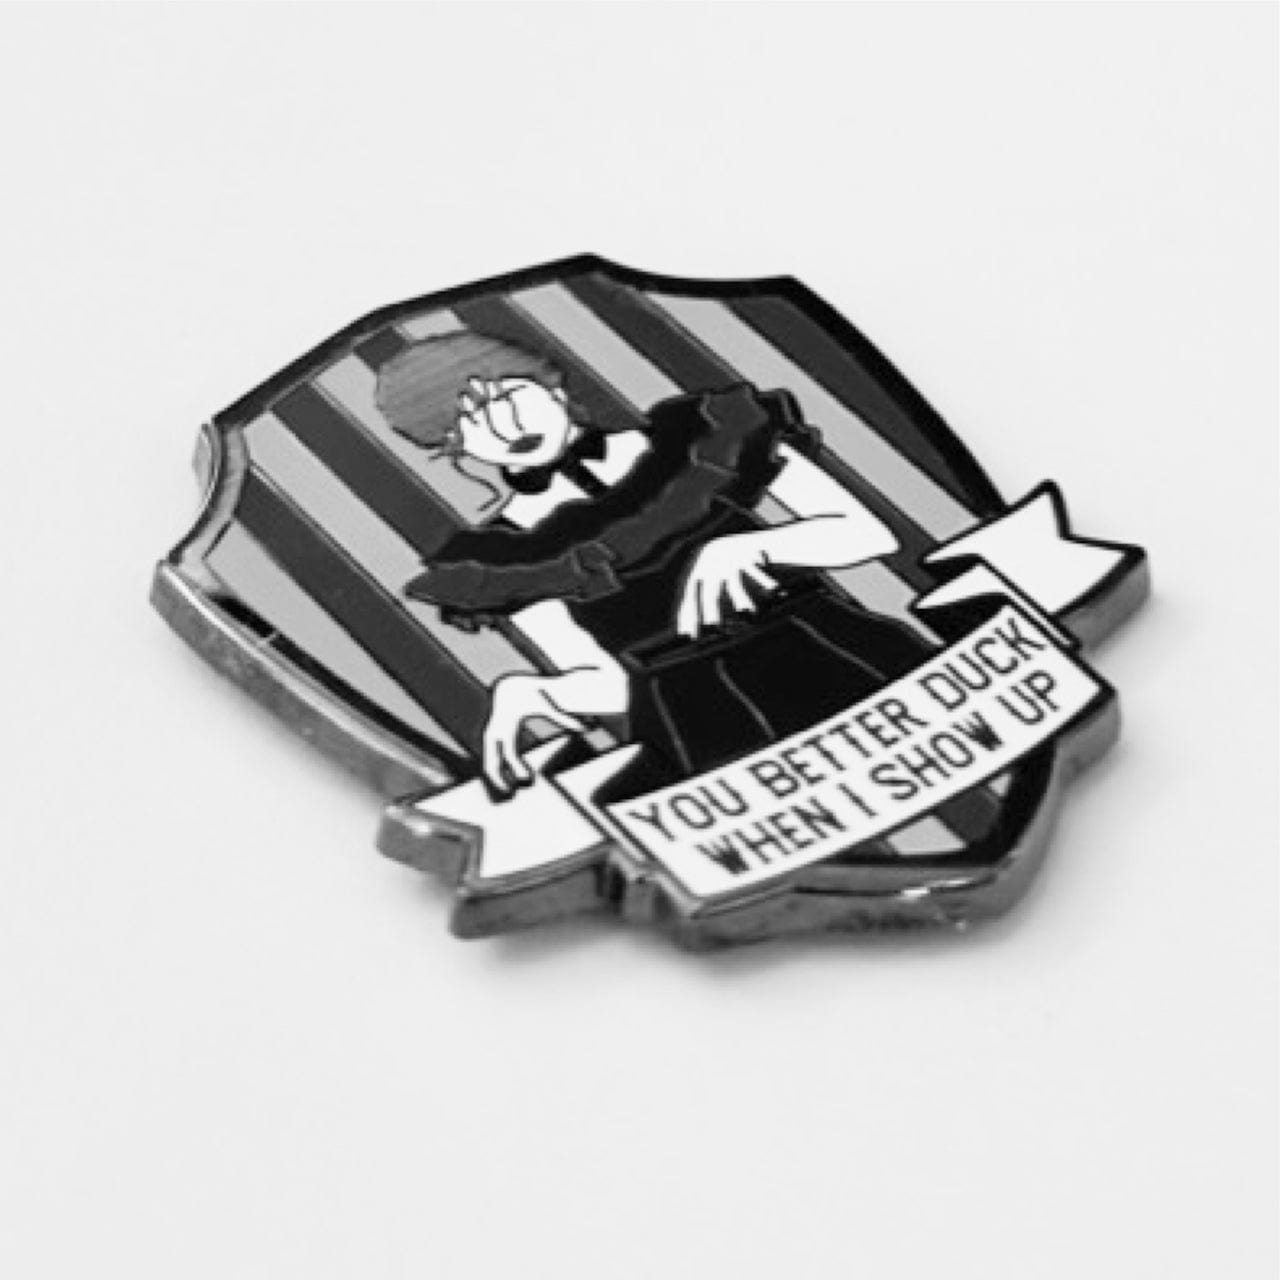 Pinbuds Enamel pin Wednesday dance pin featuring lyric "You better duck when i show up"